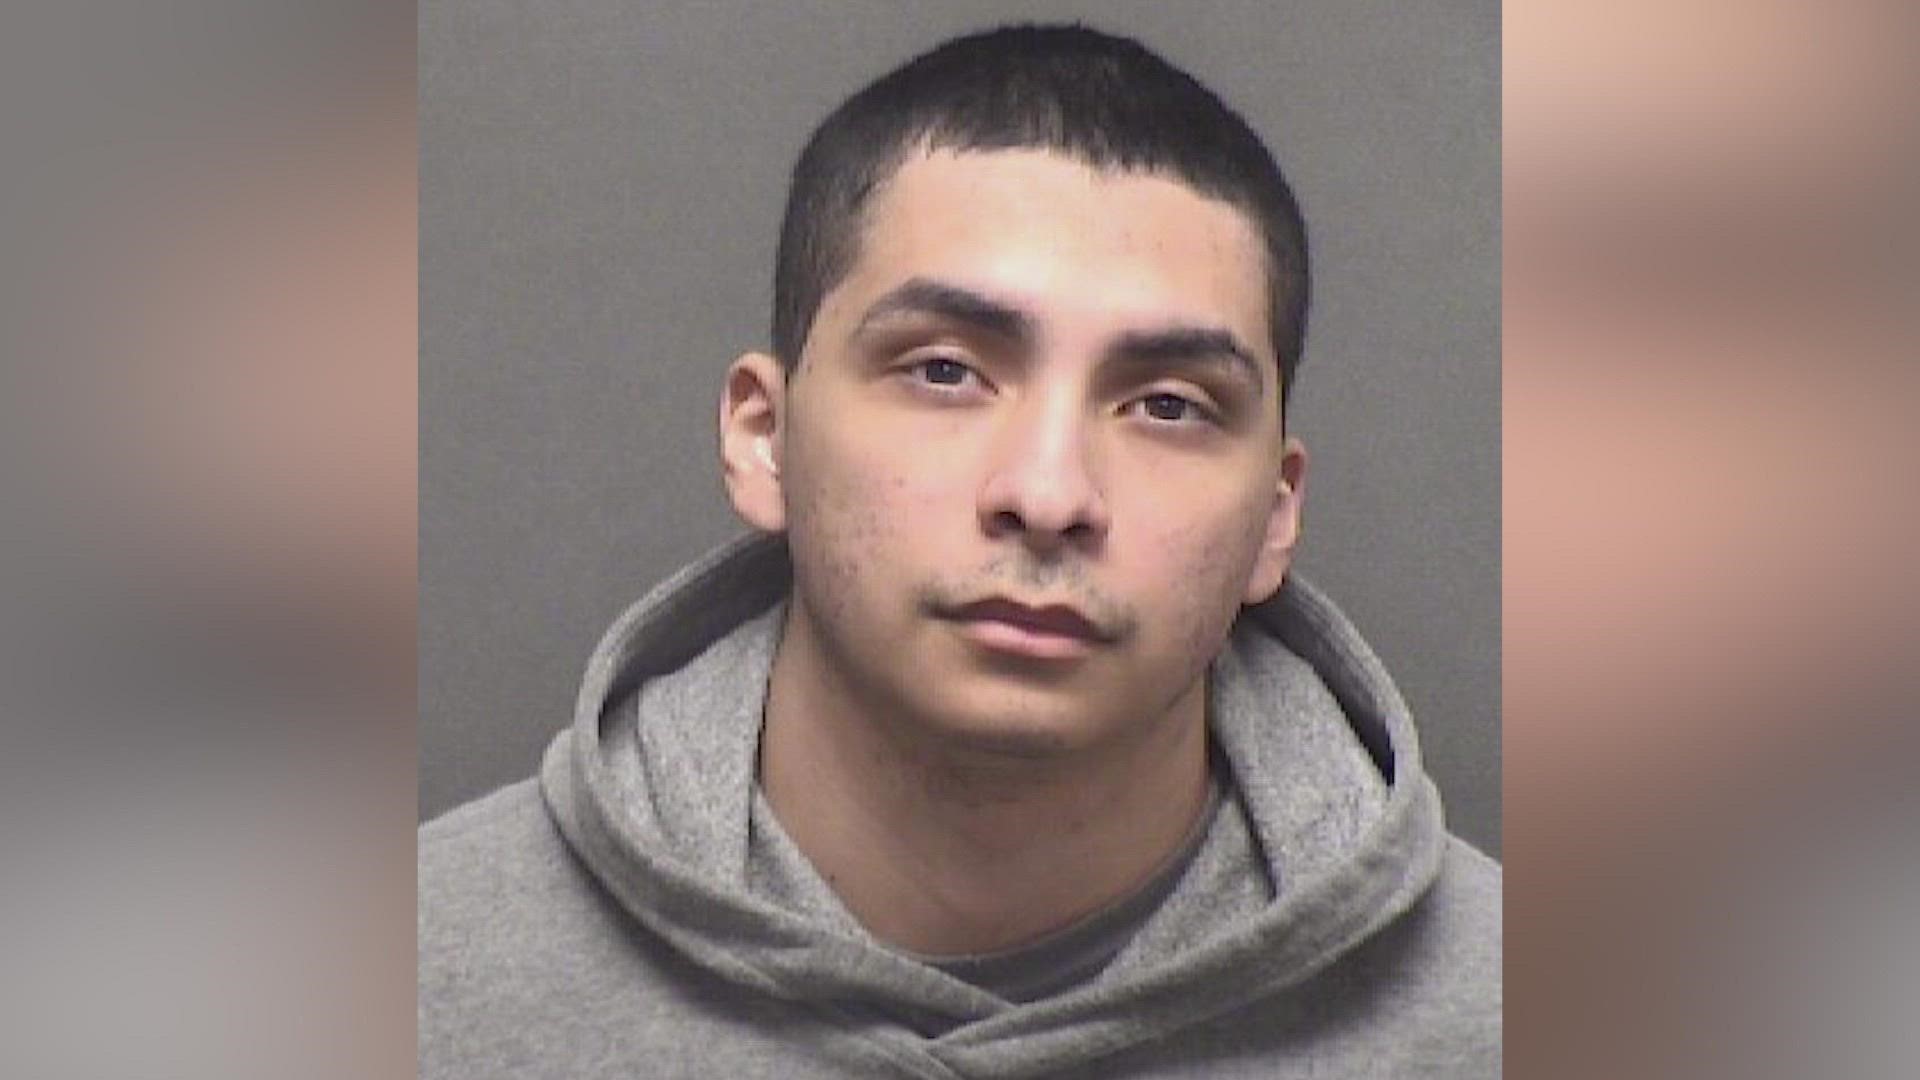 The 21-year-old man had been messaging the victim via Snapchat, according to an affidavit.